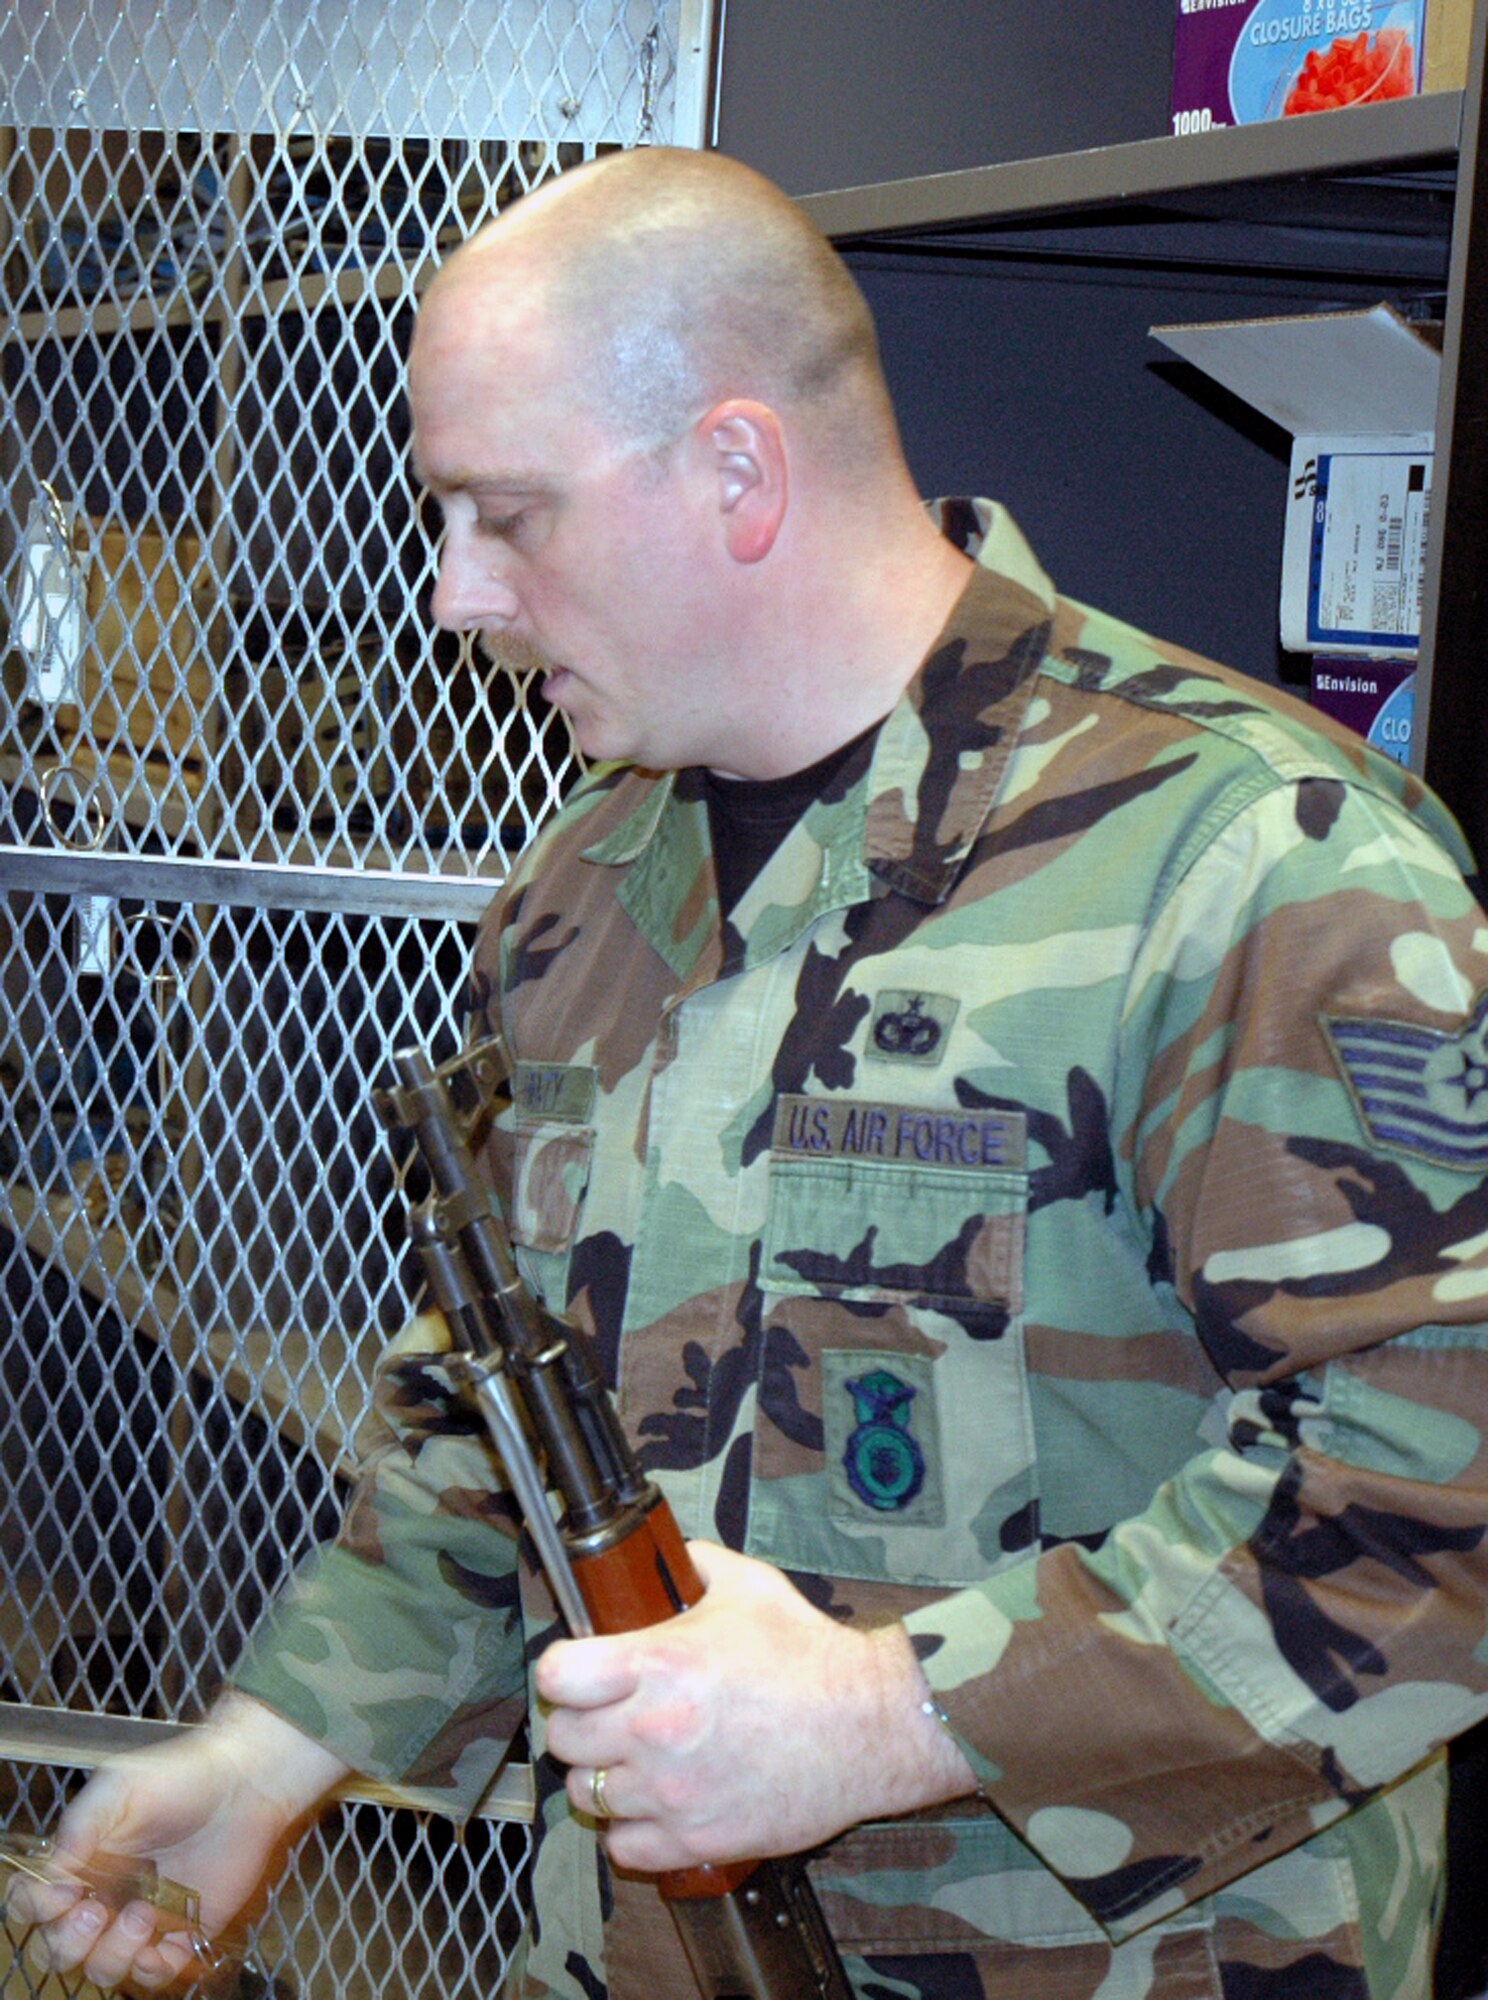 Tech. Sgt. Sean Heraty, U.S. Air Force Expeditionary Center armory, moves an AK-47 into a storage area inside the armory June 19, 2008, on Fort Dix, N.J.  The USAF EC's armory is one of the largest in the Air Force and holds the Air Force's largest inventory of foreign weapons on the U.S.' East Coast.  Largely, the Center's weapons are used for training in numerous expeditionary field courses.  (U.S. Air Force Photo/Tech. Sgt. Scott T. Sturkol)